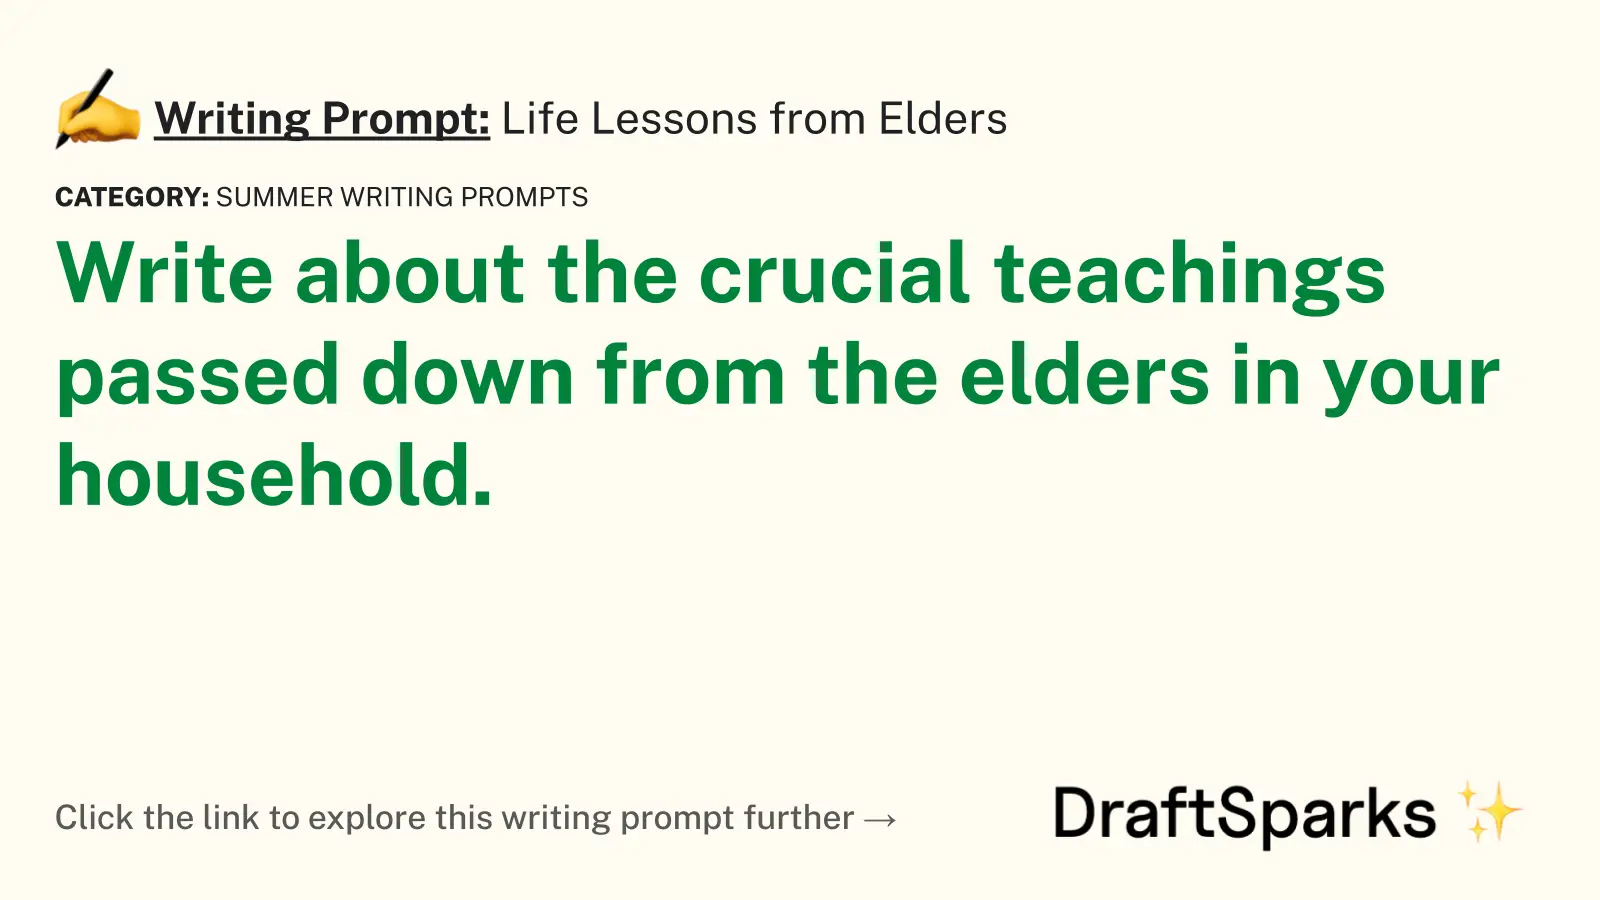 Life Lessons from Elders